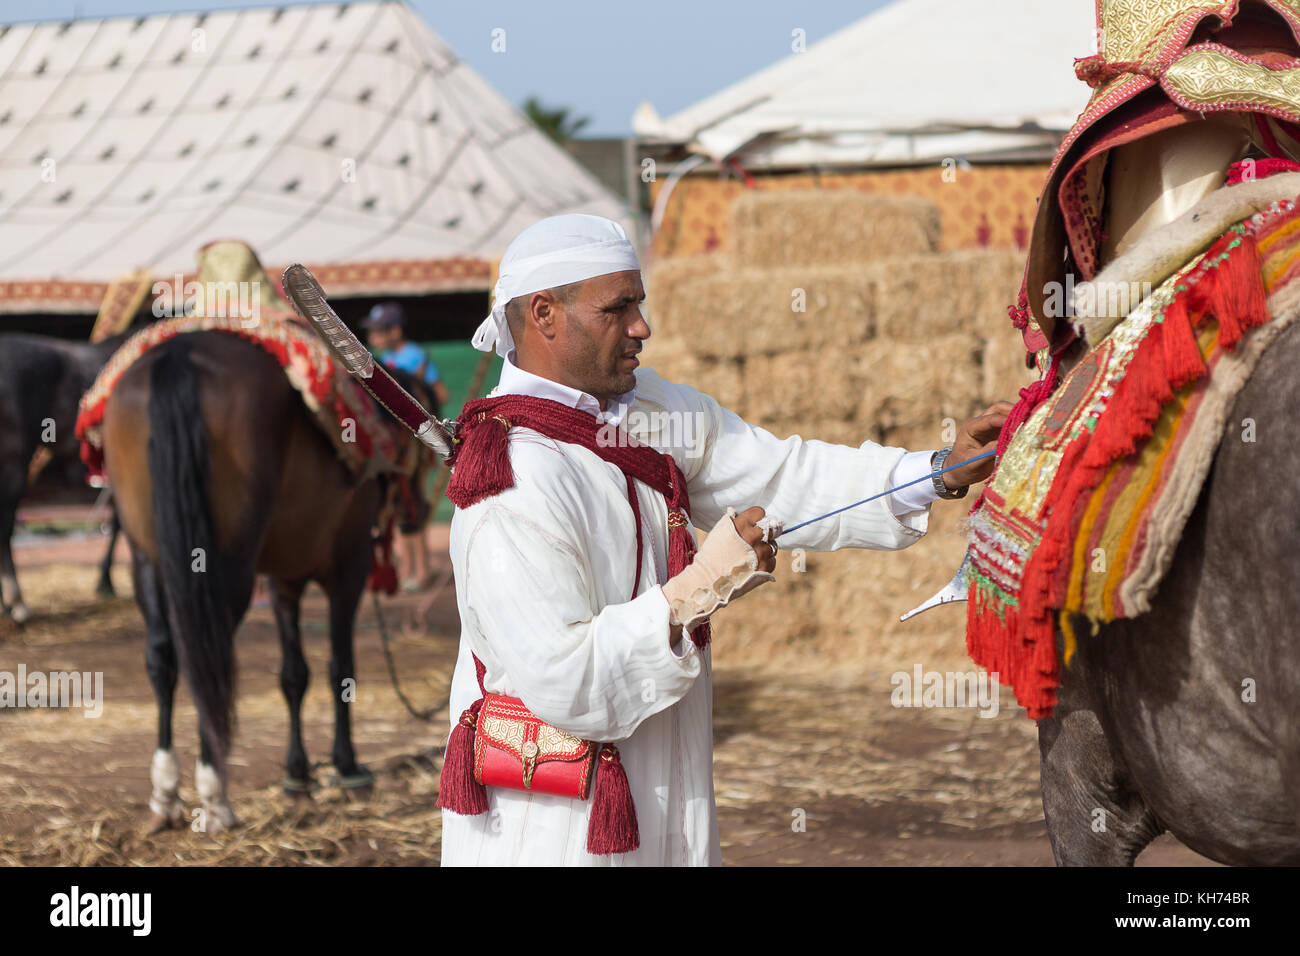 Fantasia is a traditional exhibition of horsemanship in the Maghreb performed during cultural festivals and to close Maghrebi wedding celebrations. Stock Photo